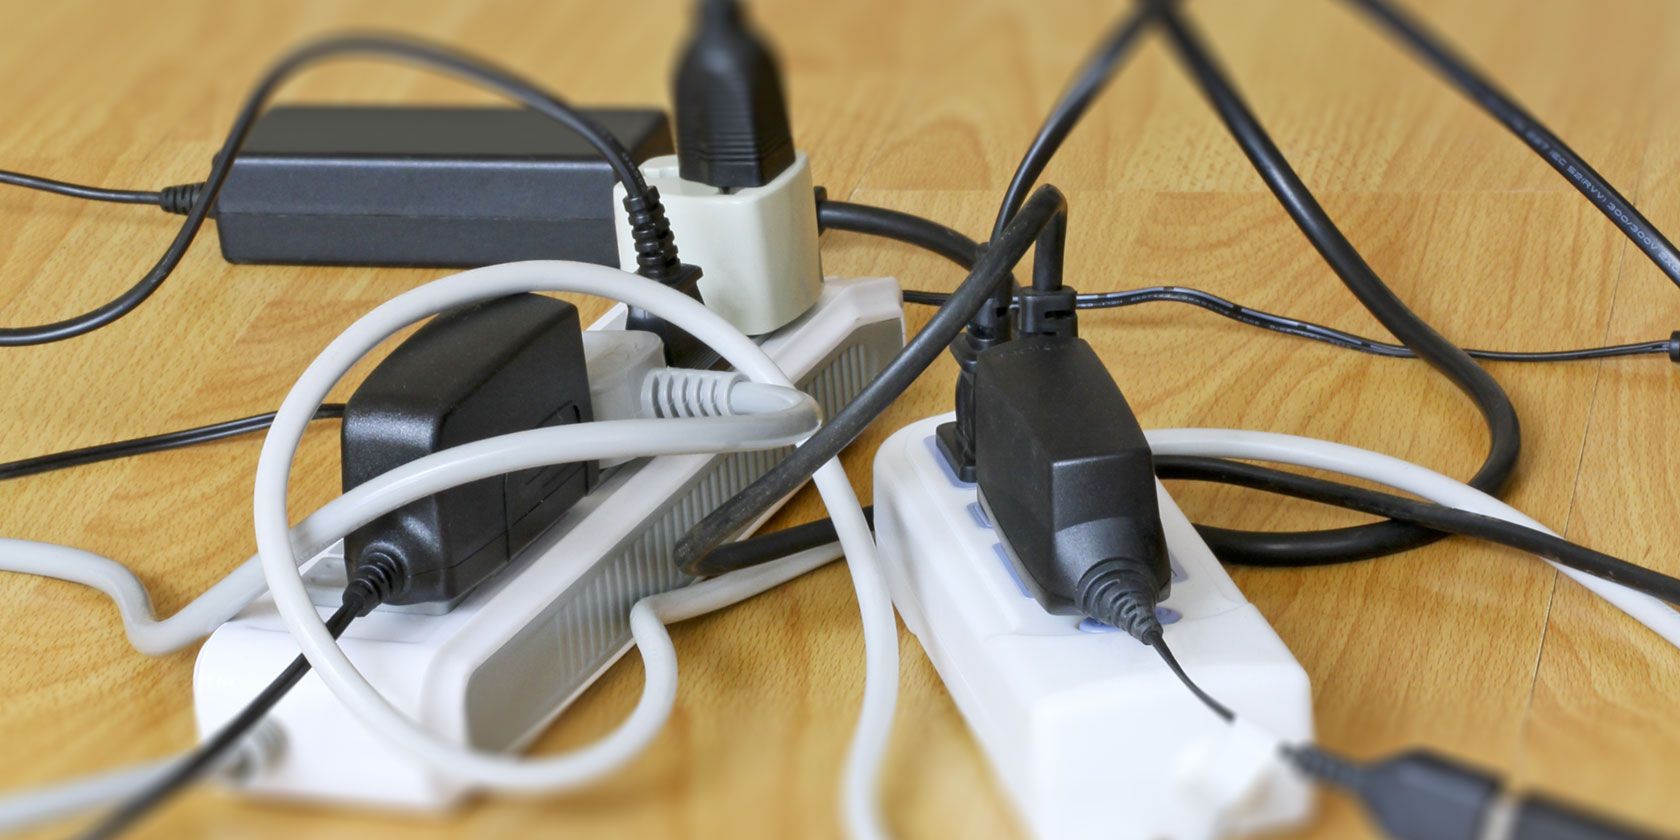 Clean Up the Cable Mess for LESS - PC Desk Cable Management Guide